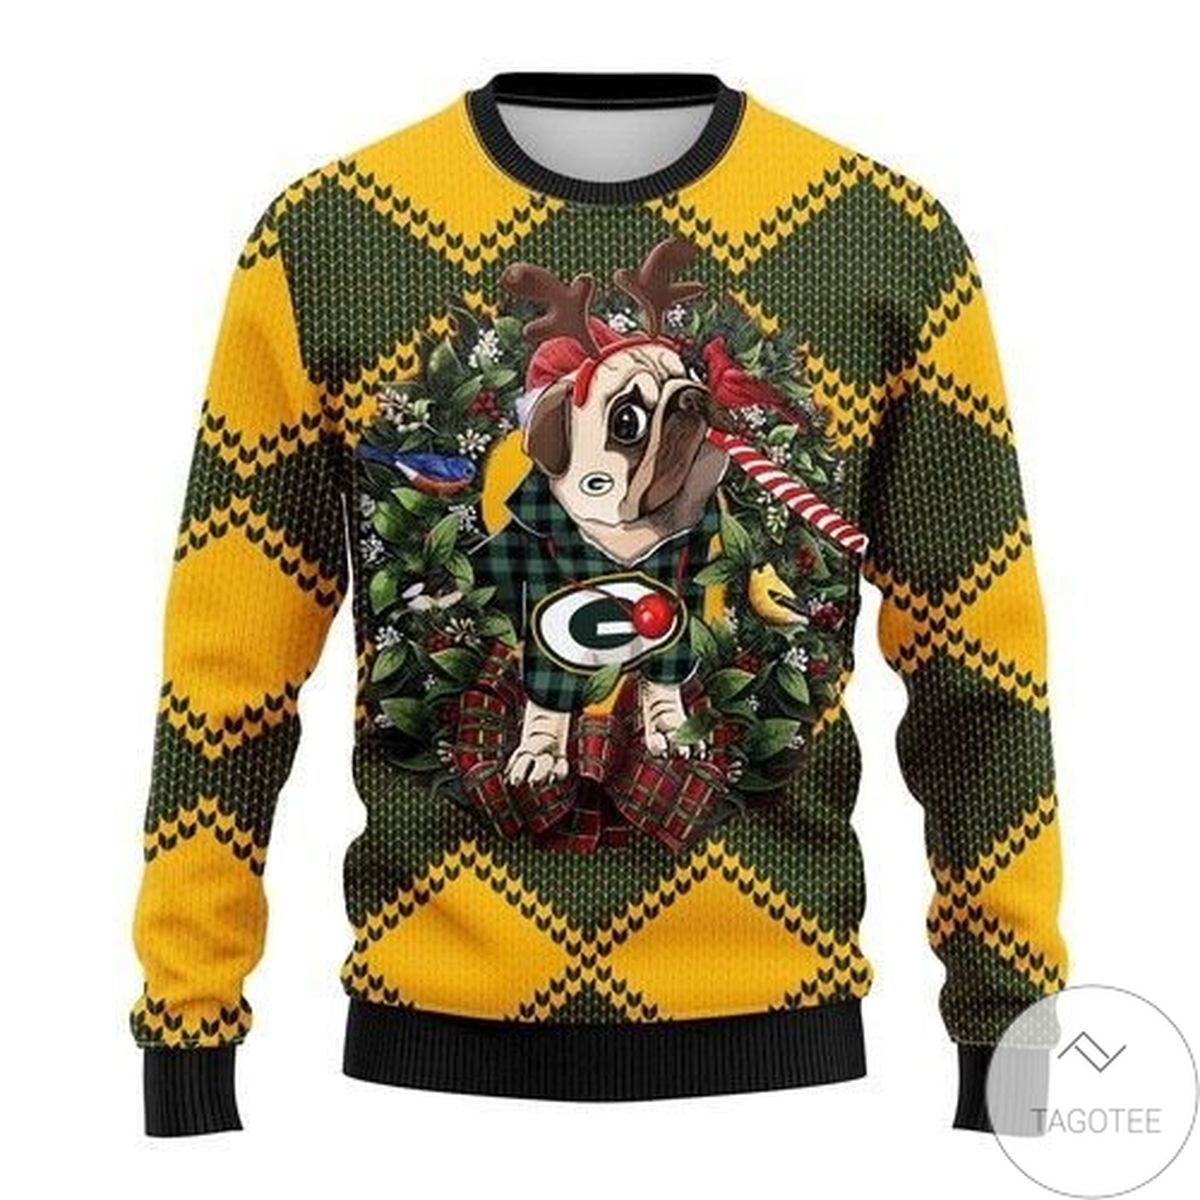 Nfl Green Bay Packers Pug Dog Ugly Christmas Sweater